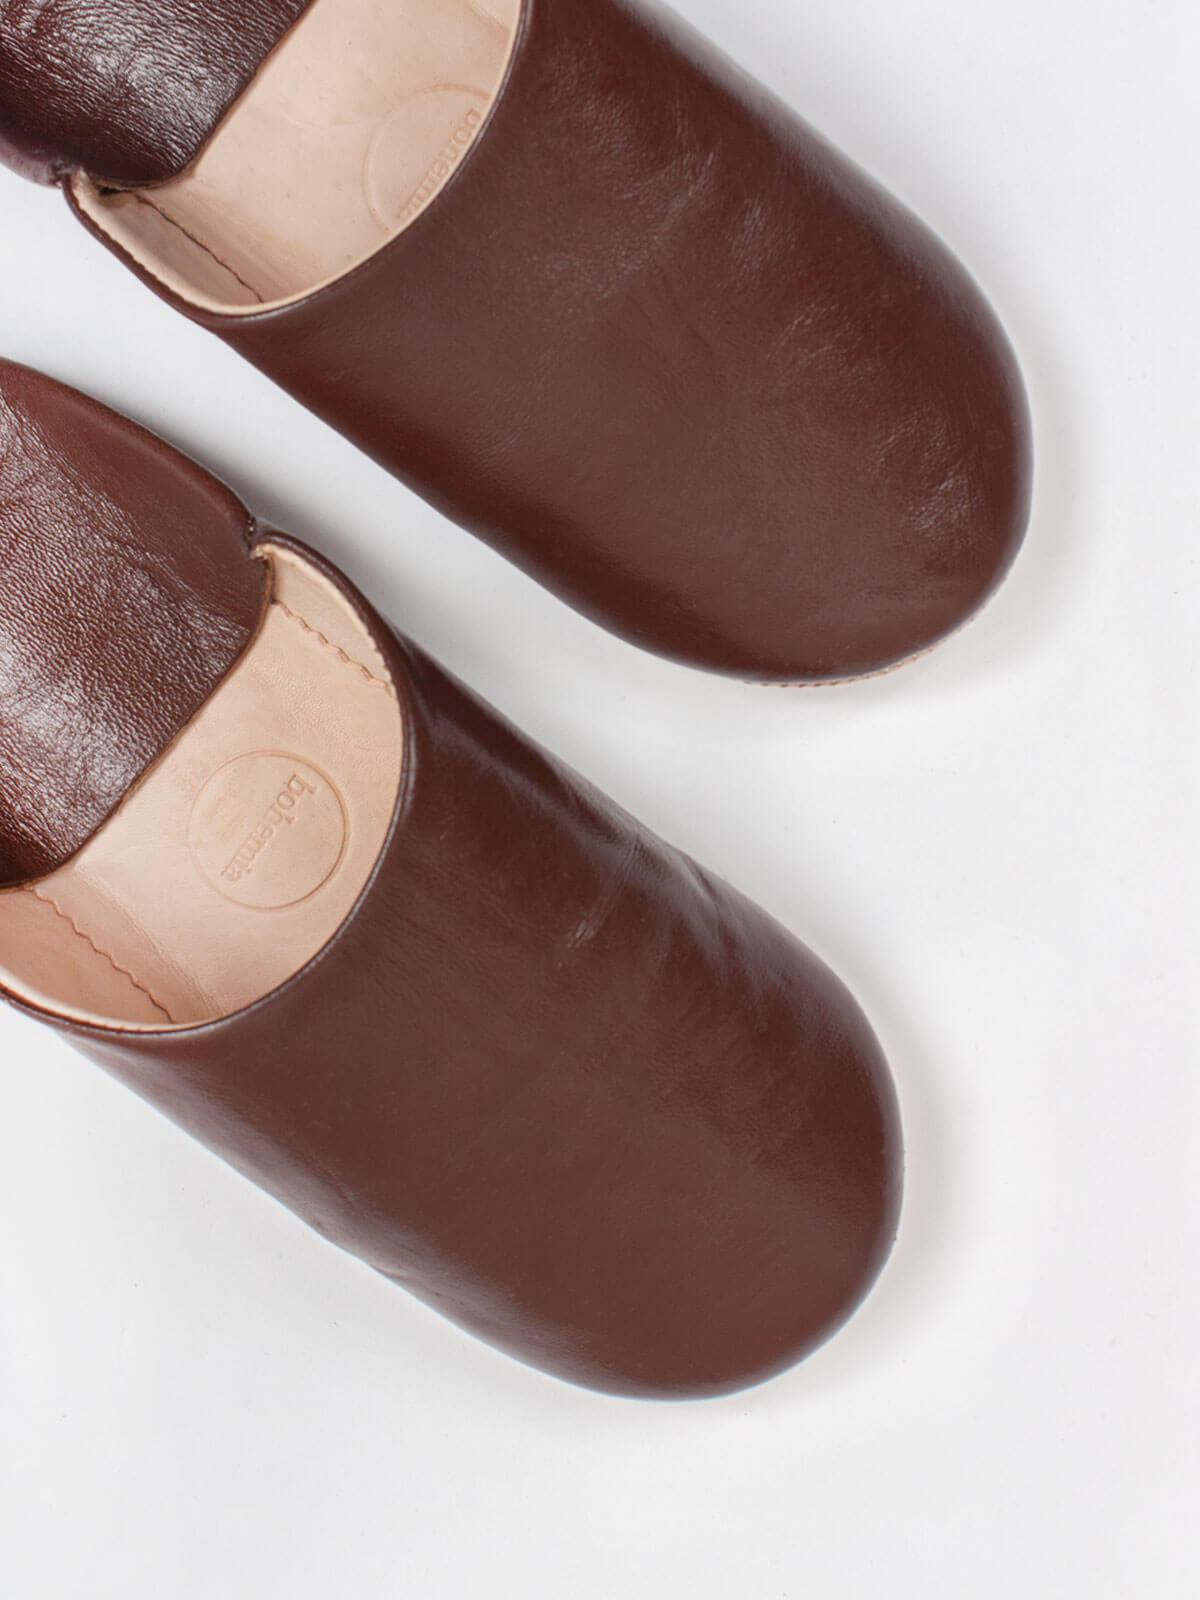 MOROCCAN MENS BABOUCHE SLIPPERS - CHOCOLATE